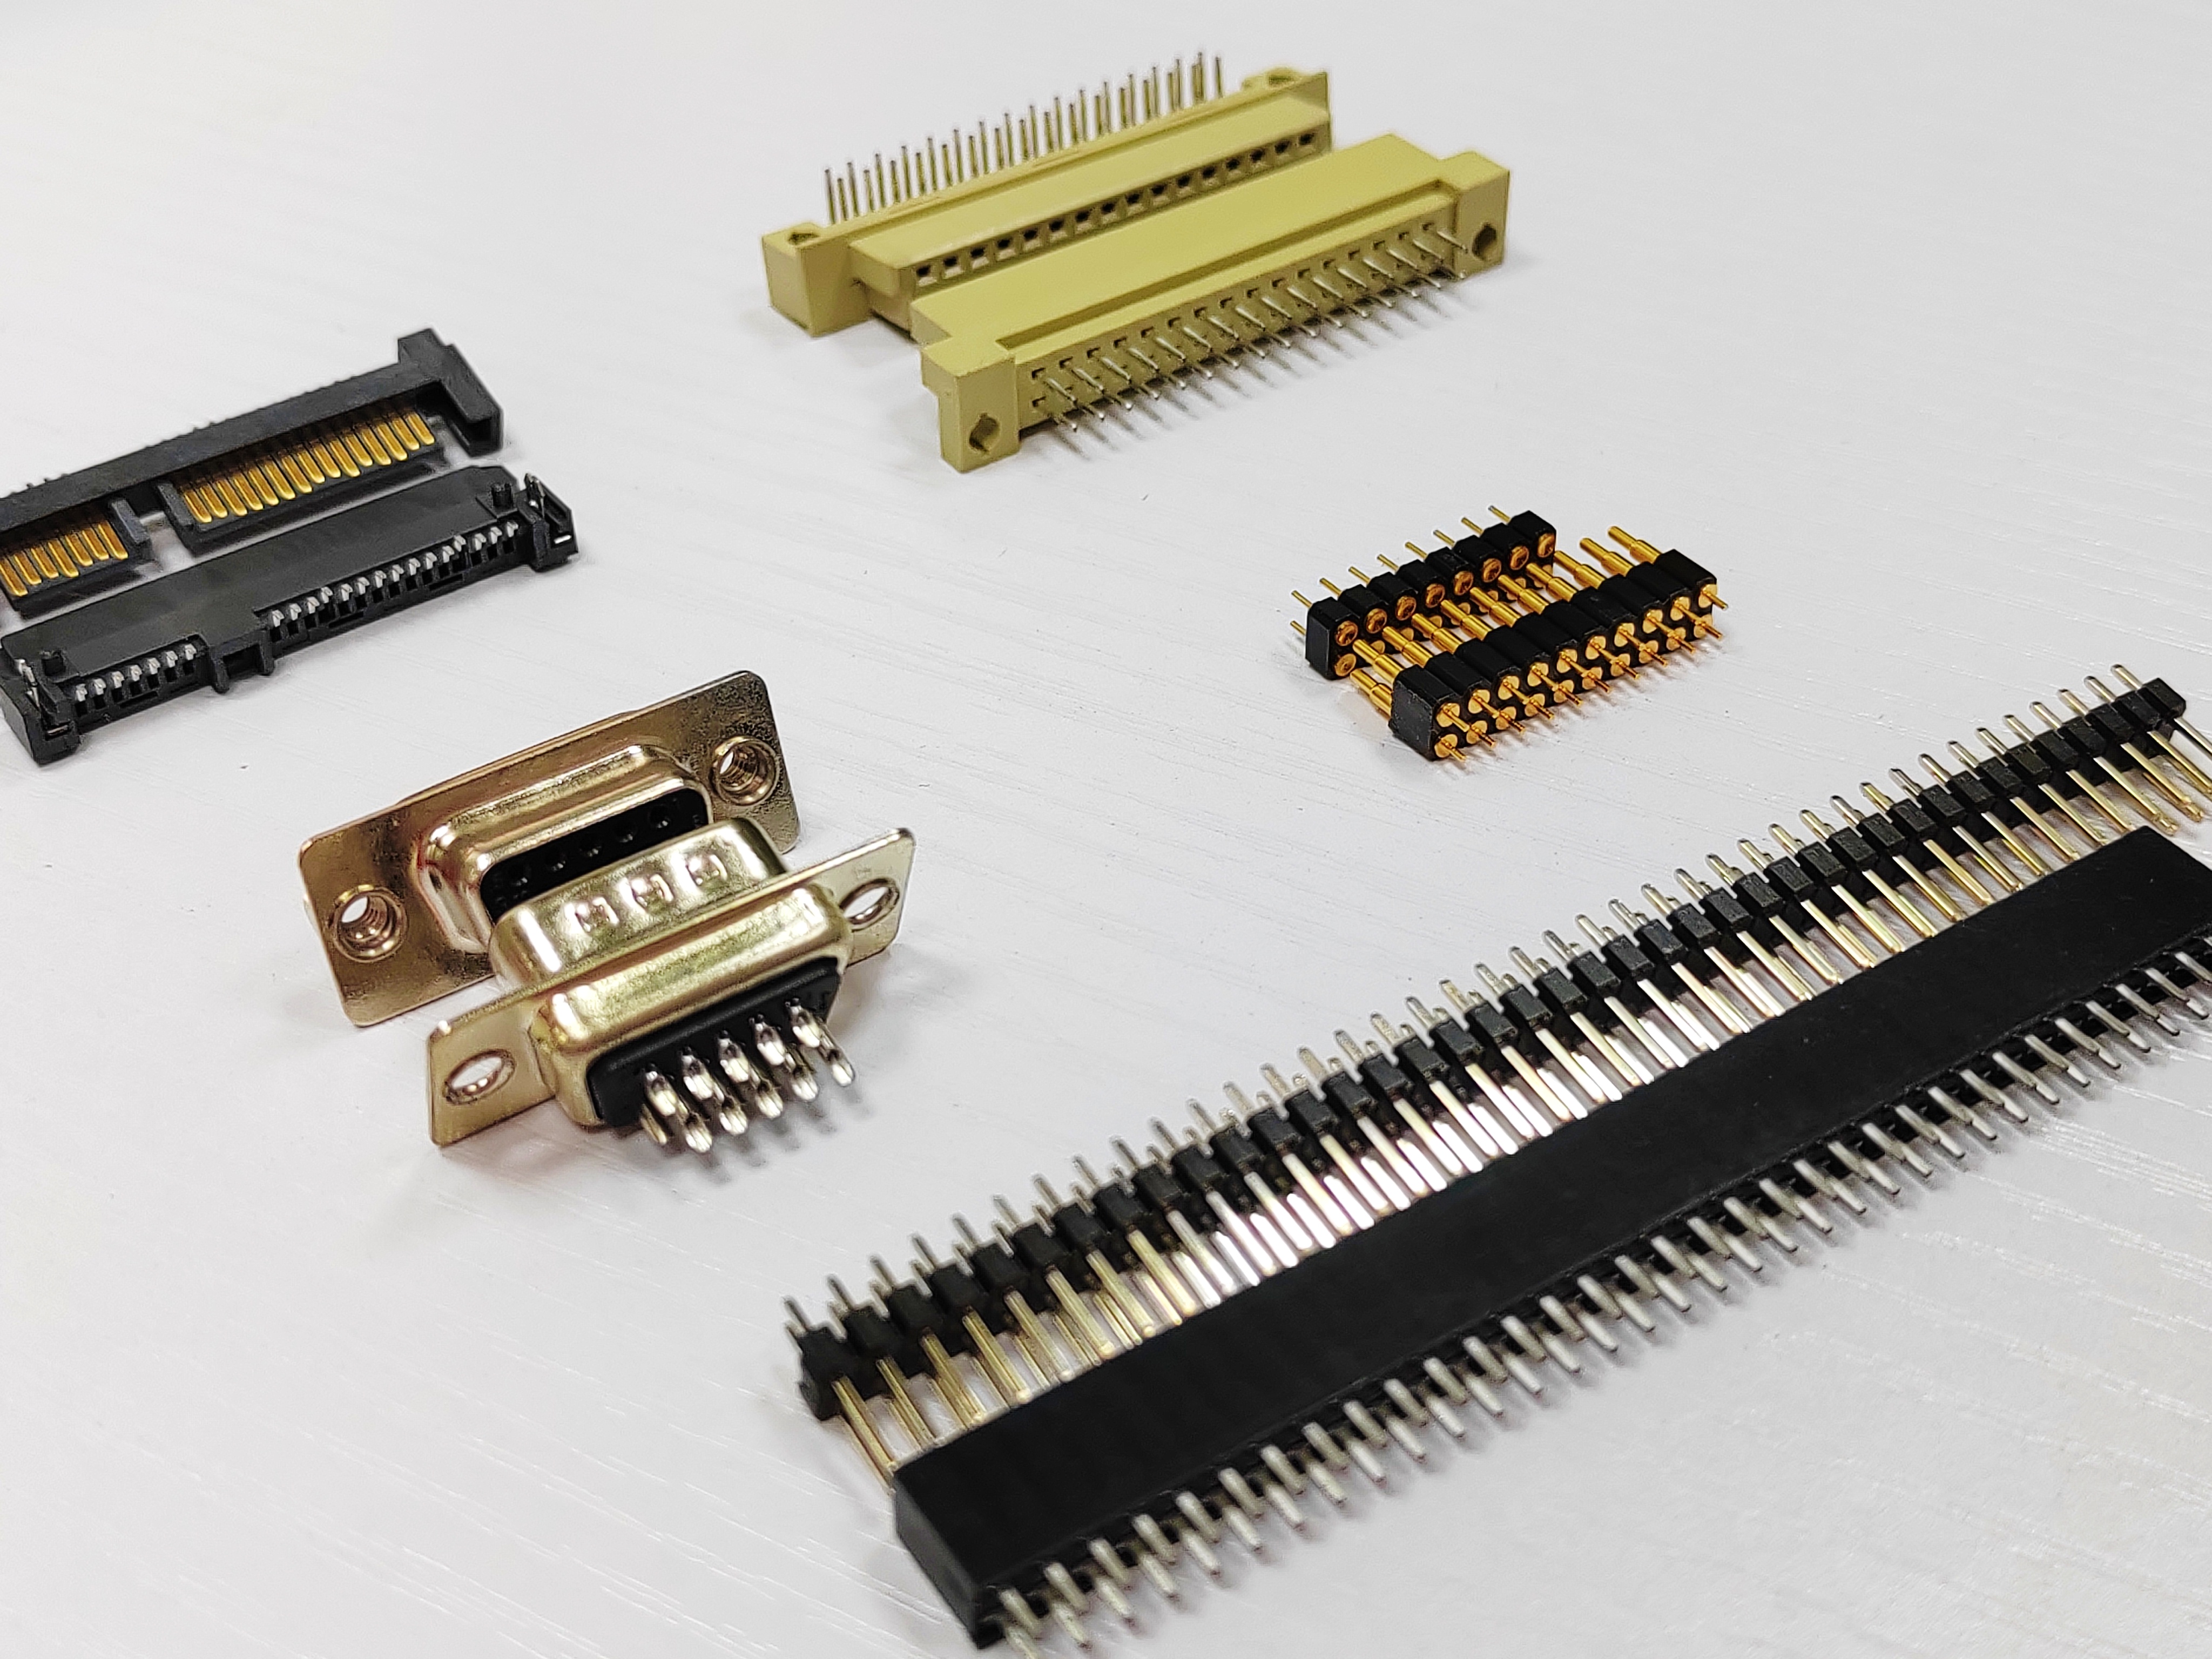 Application advantages and disadvantages of board connector